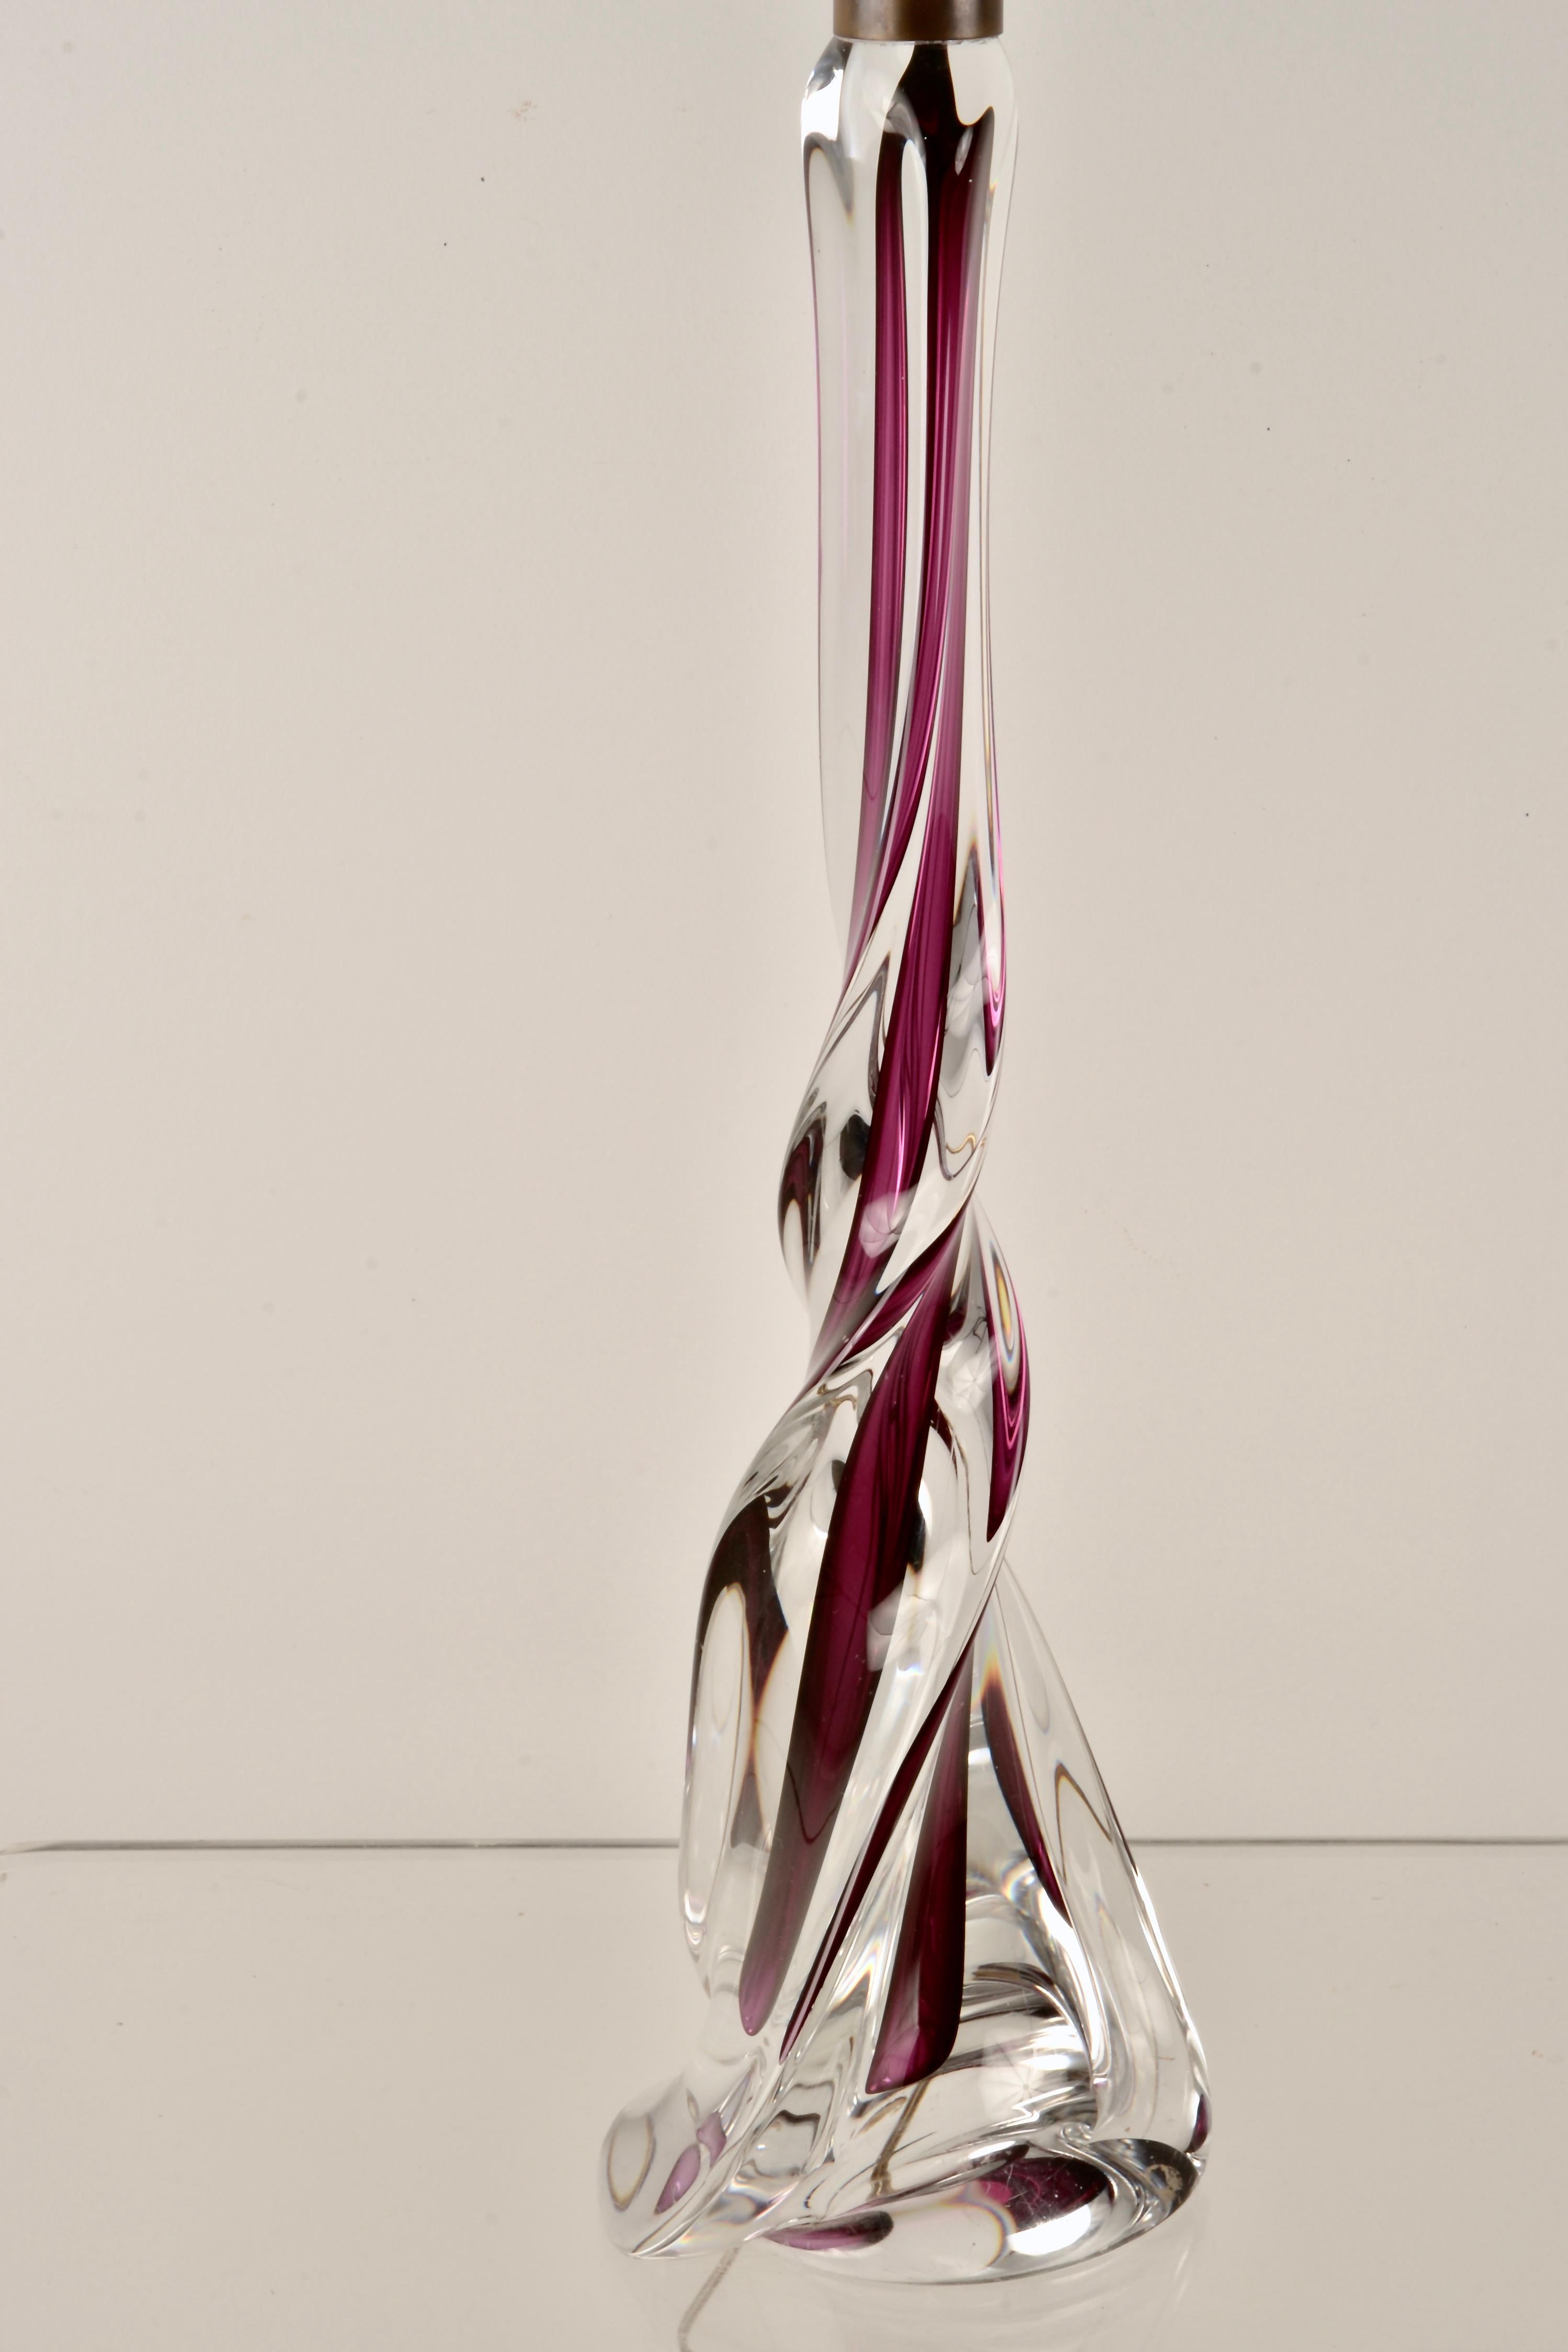 An unusually tall example of the elegant glass table lamps by Belgian glassworks, Val Saint Lambert. Featuring hand blown-glass crafted into twisted cased glass in clear and ruby. Custom lamp fittings are brass. Base is signed and numbered. Very